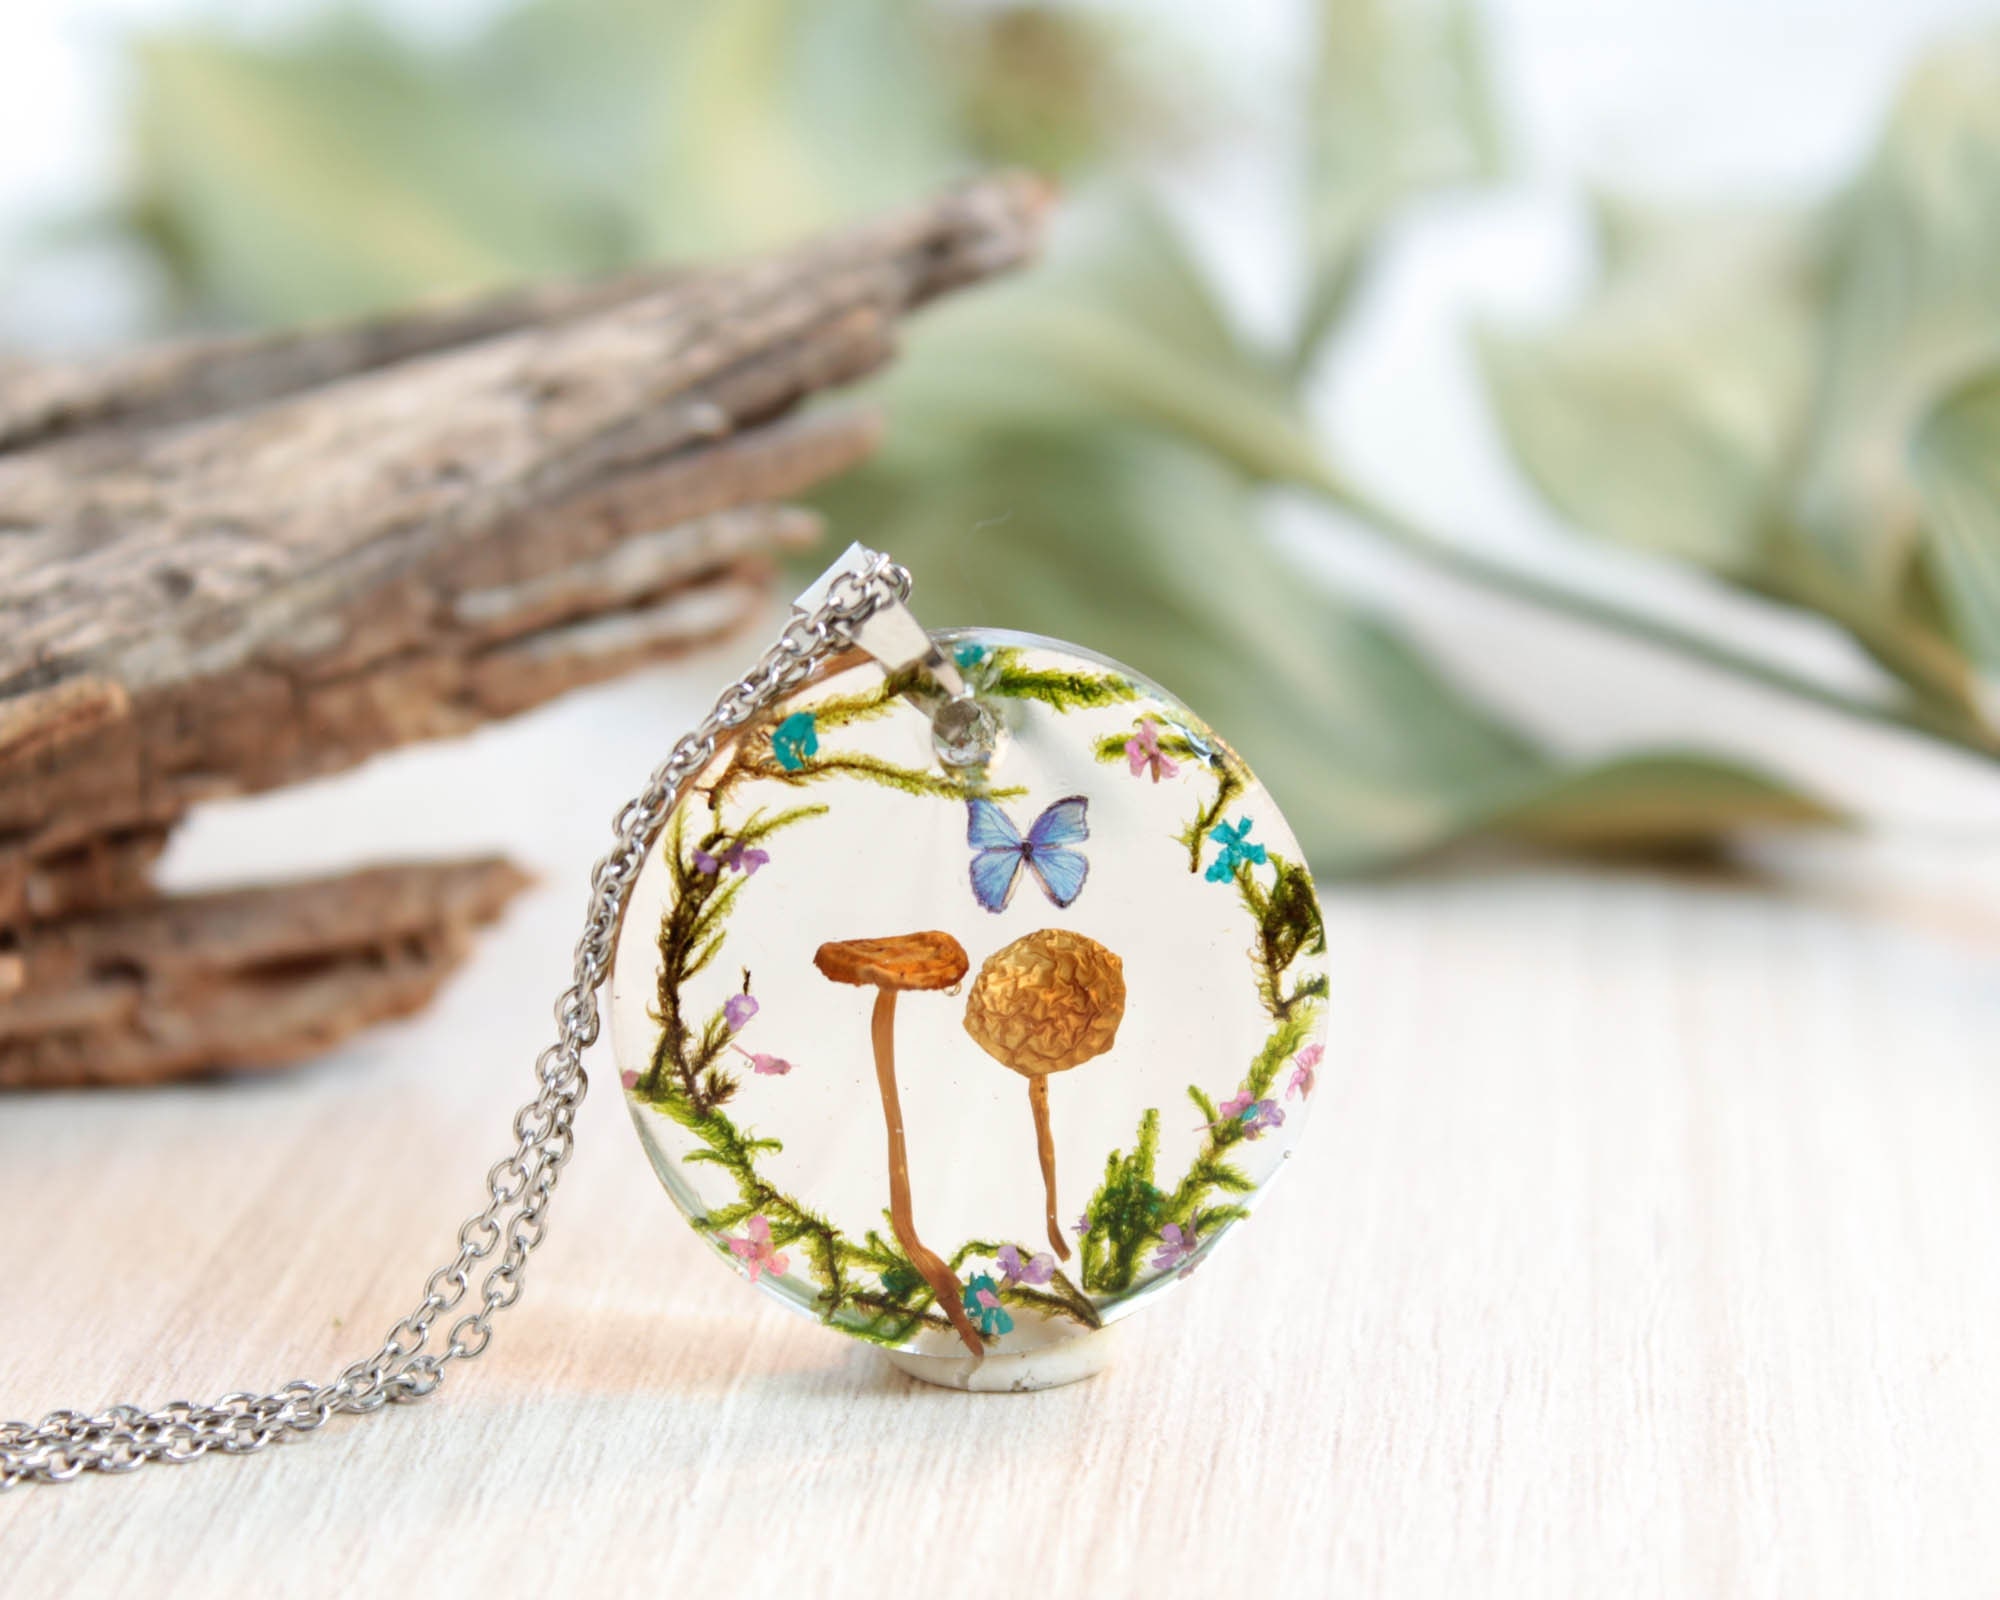 Jewelry Made By Me Resin Craft Flower Drop Pendant Mini Kit